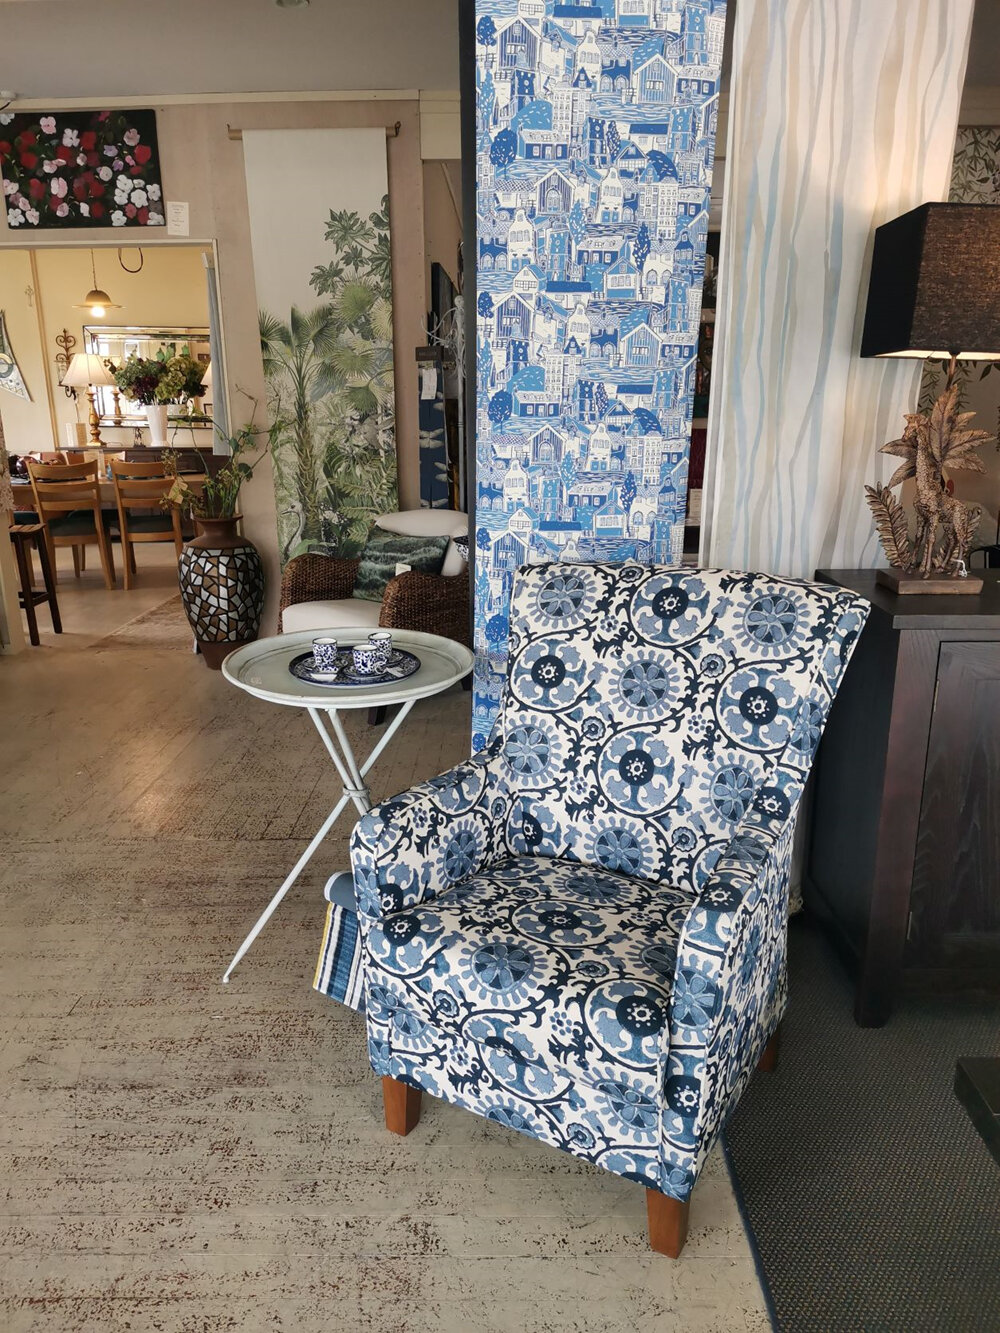 Zara Chair bloomdesigns upholstery made to order new zealand